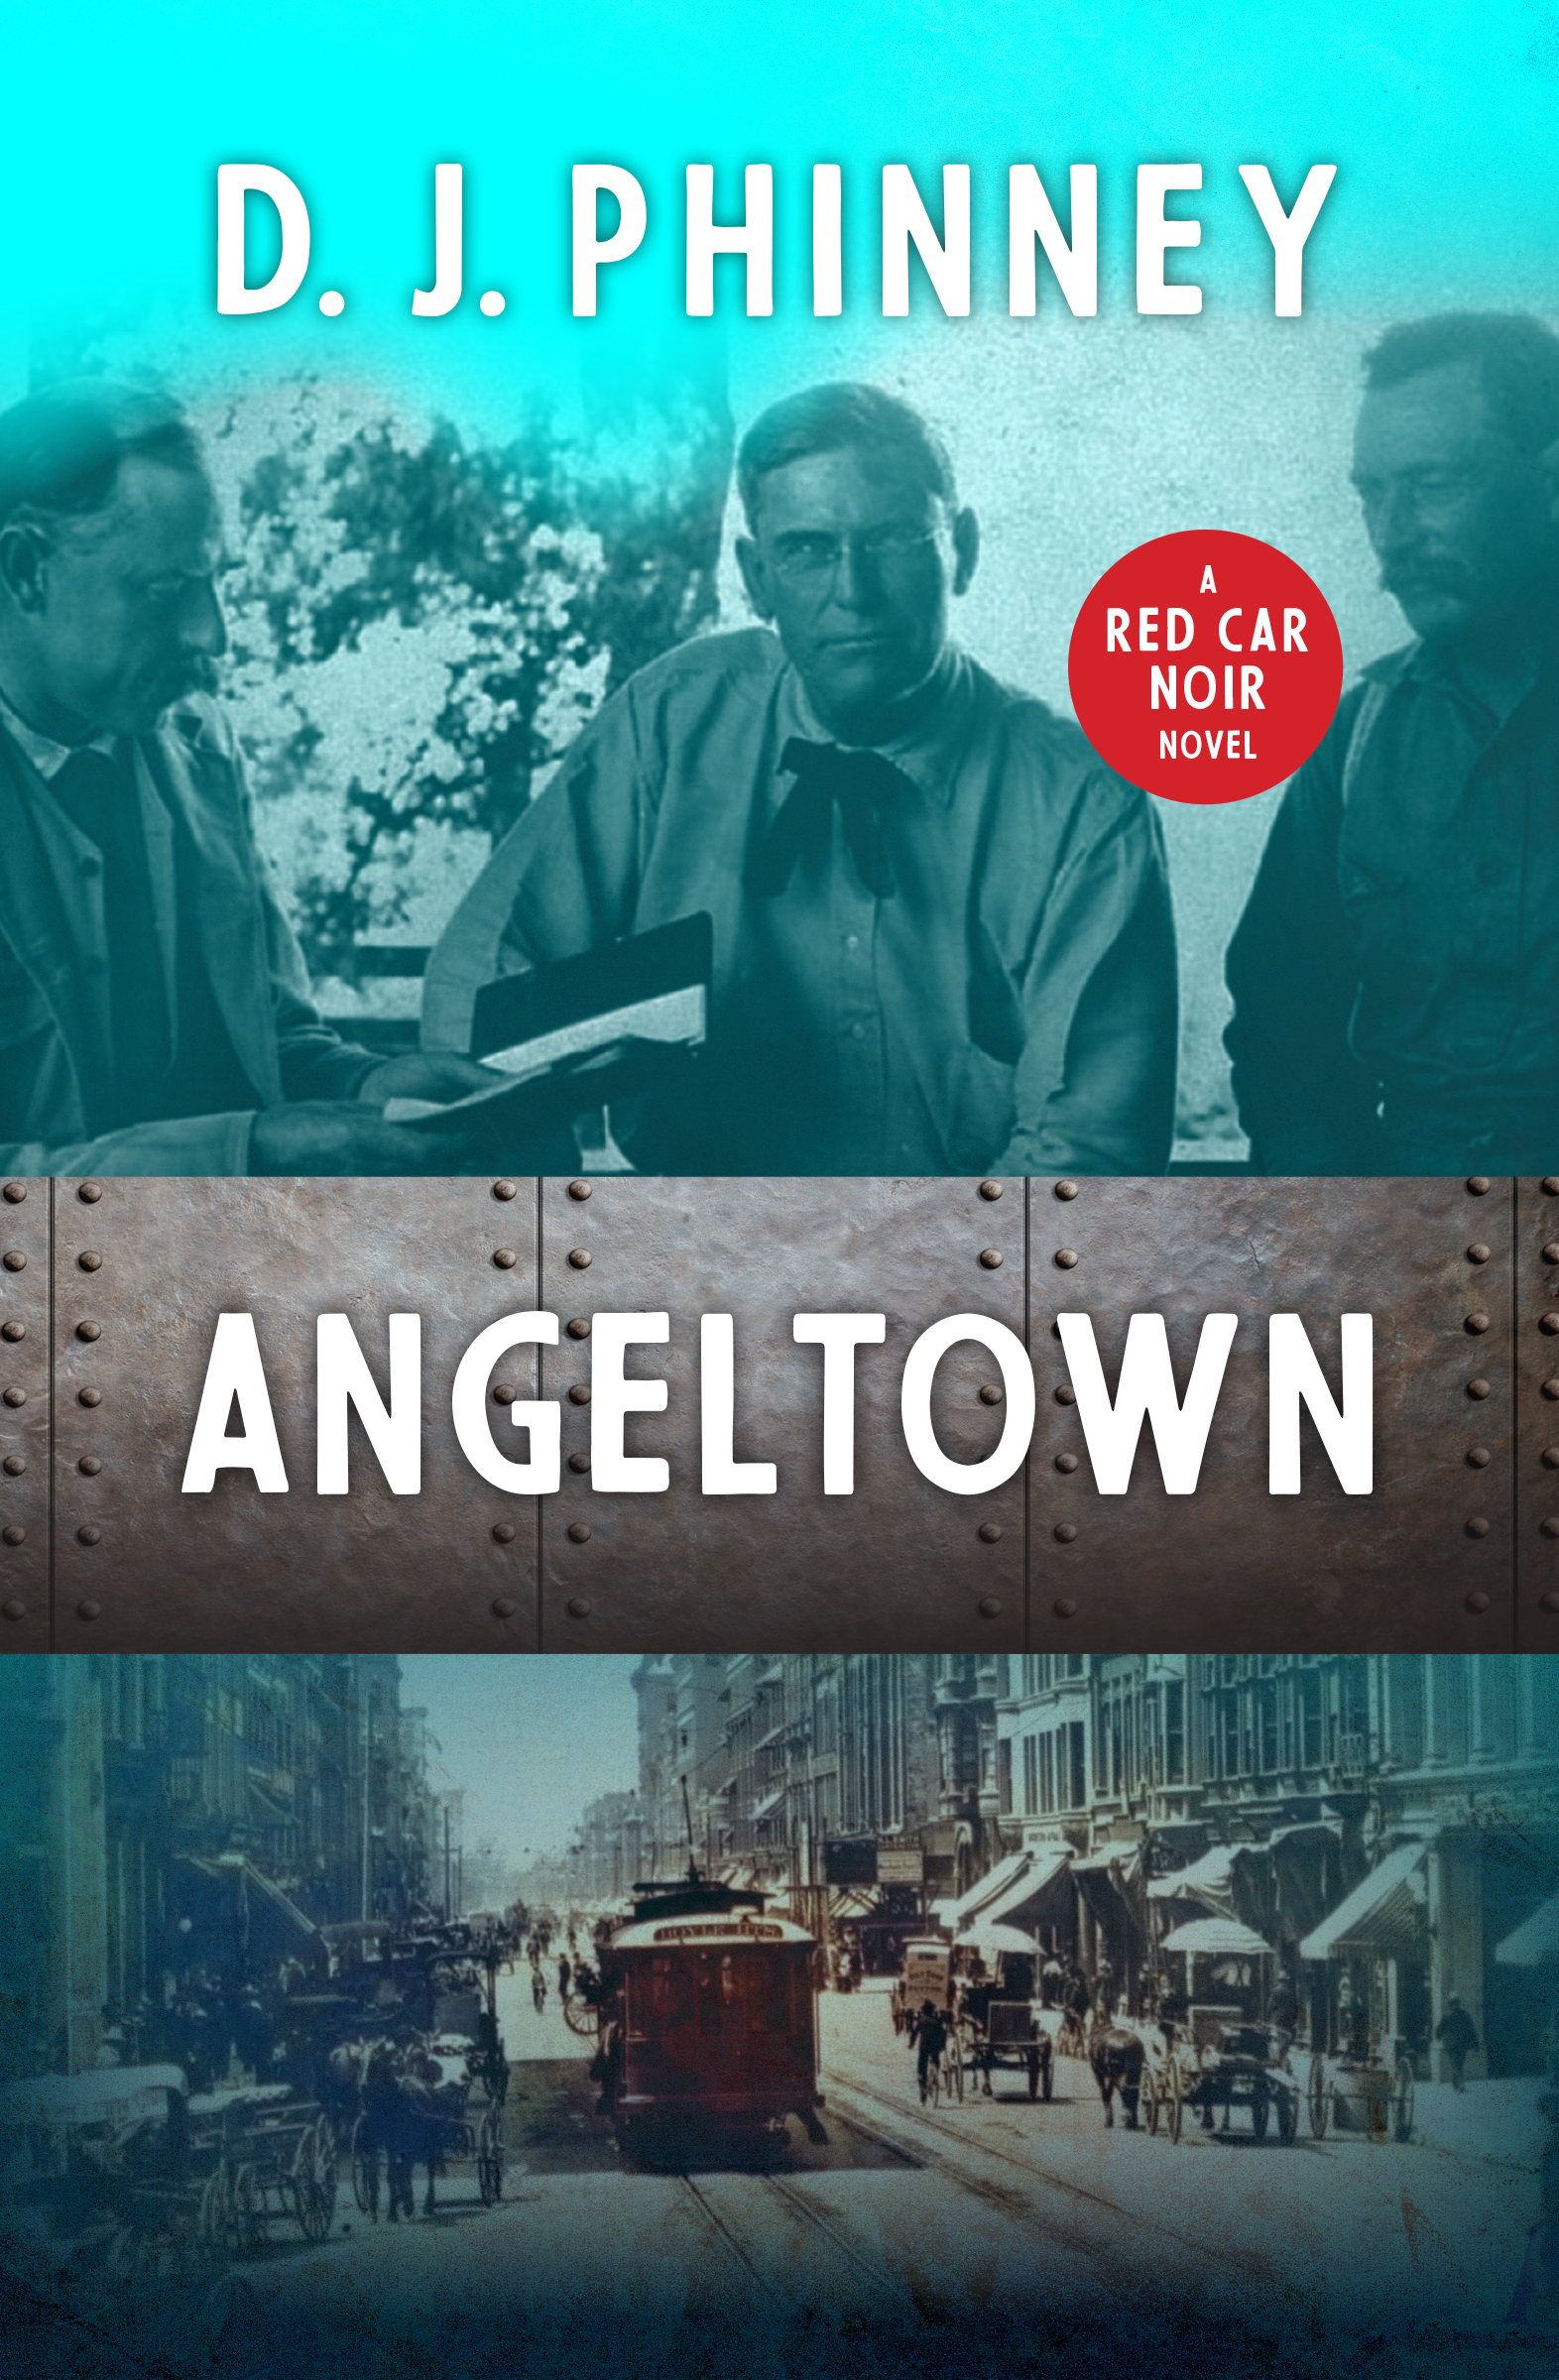 Angeltown Cover copy